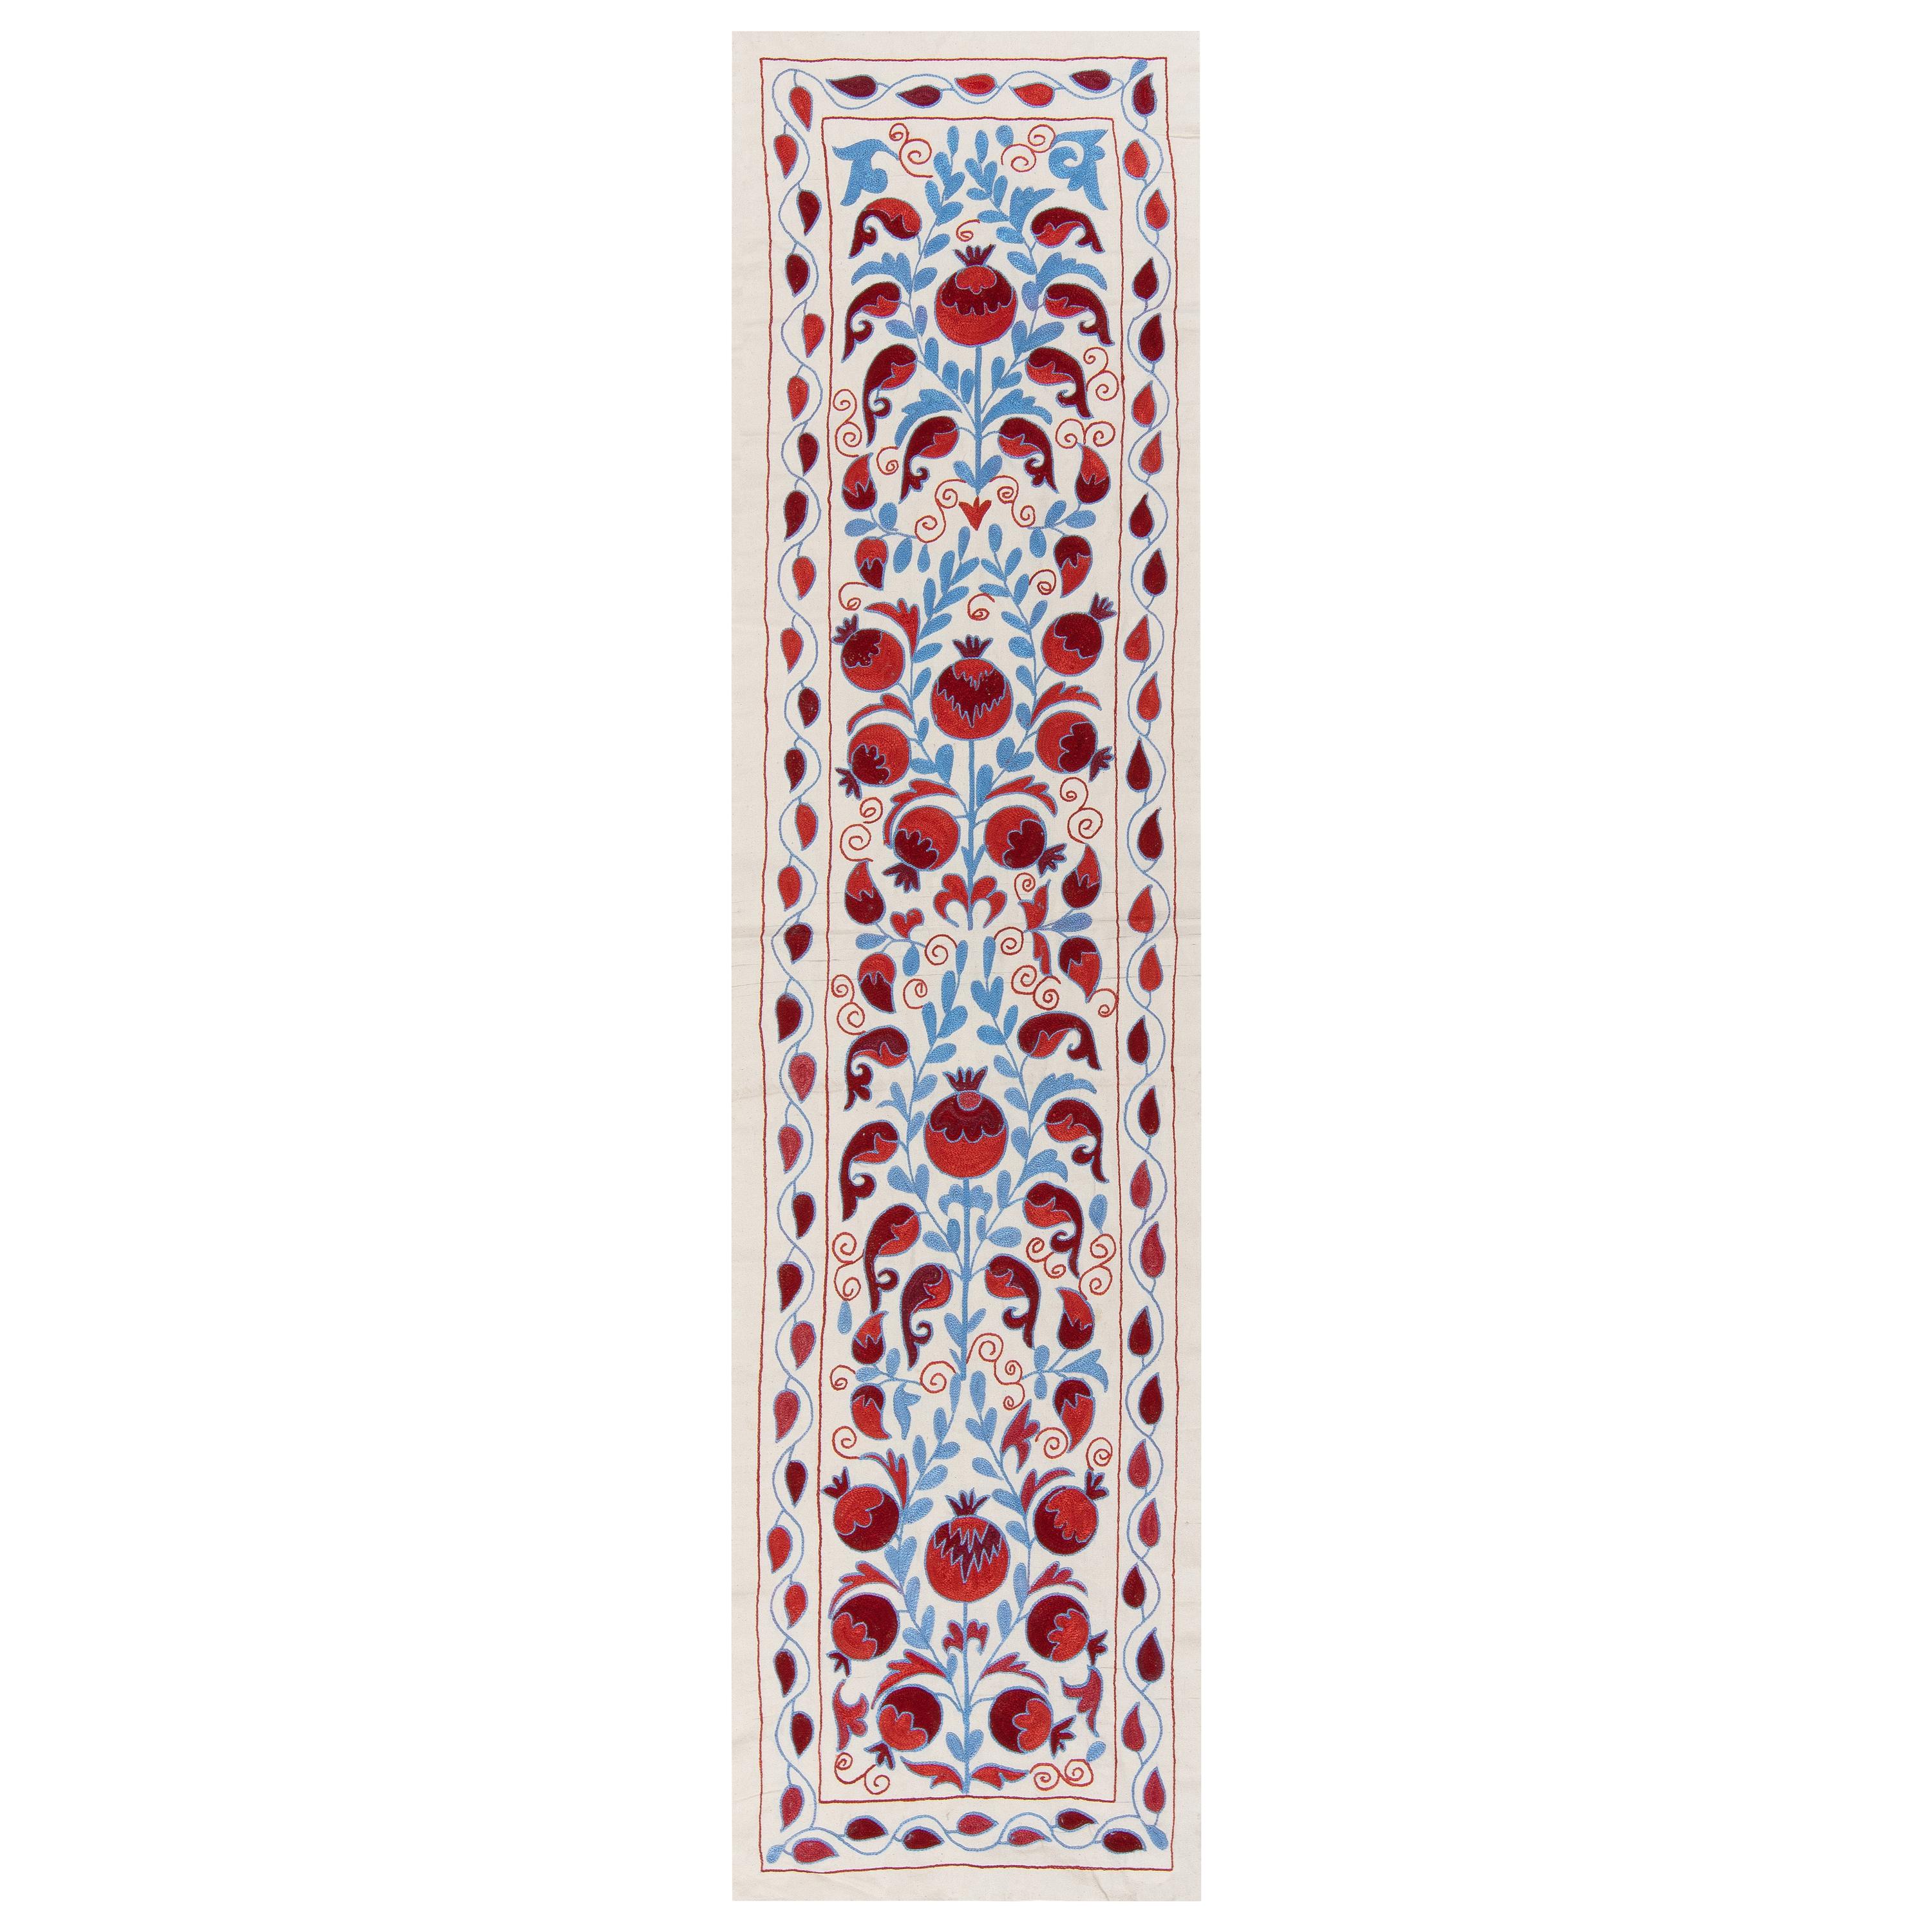 1.7x6.3 Ft Silk Embroidery Table Runner, Uzbek Wall Hanging in Red, Cream & Blue